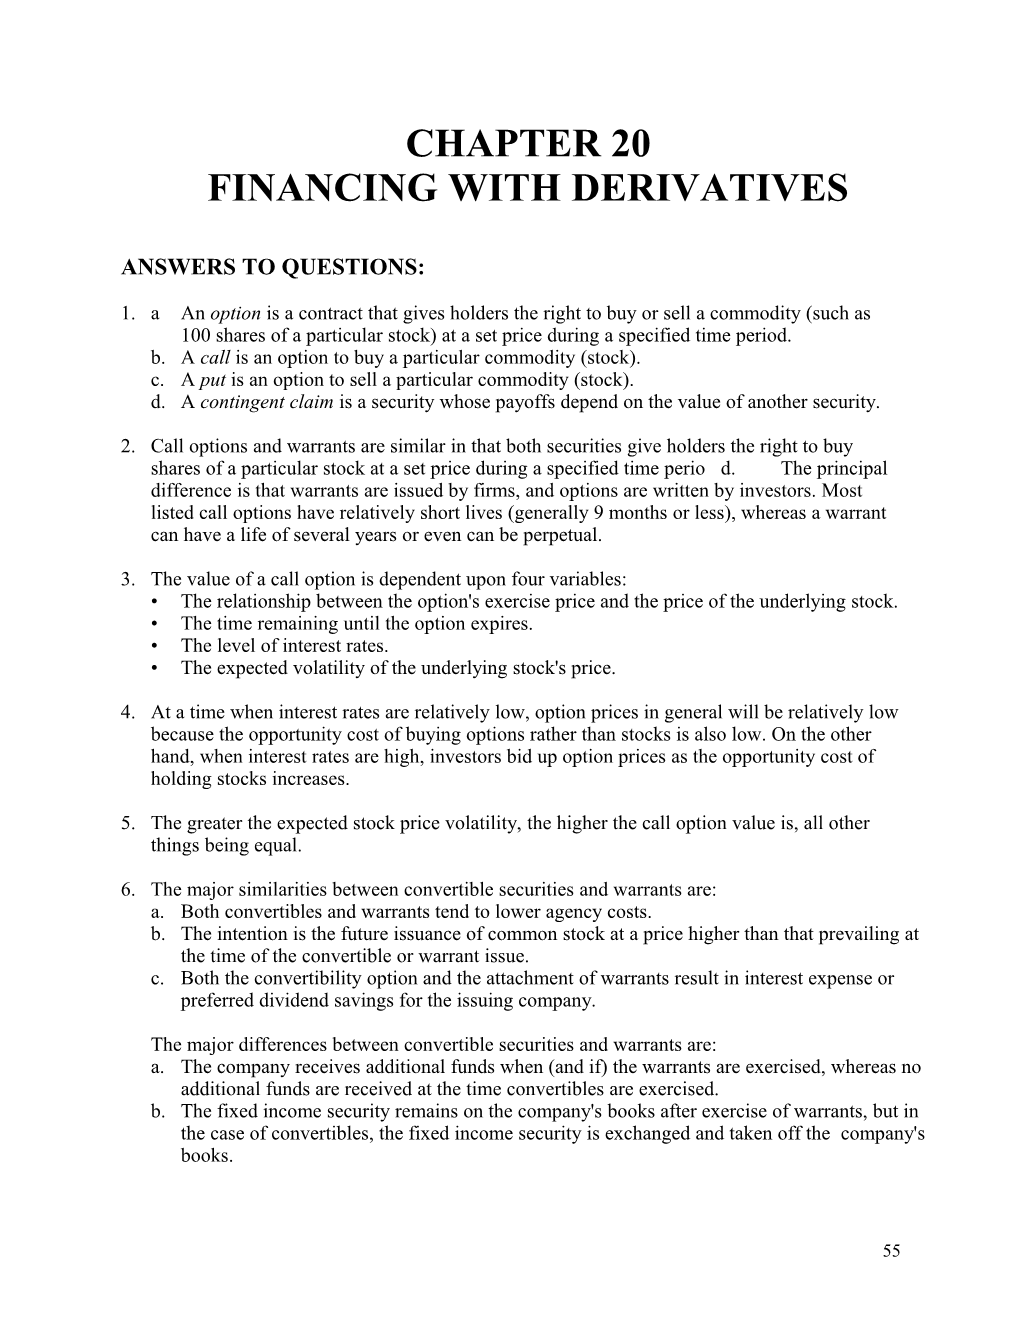 Chapter 20/Financing with Derivatives 1